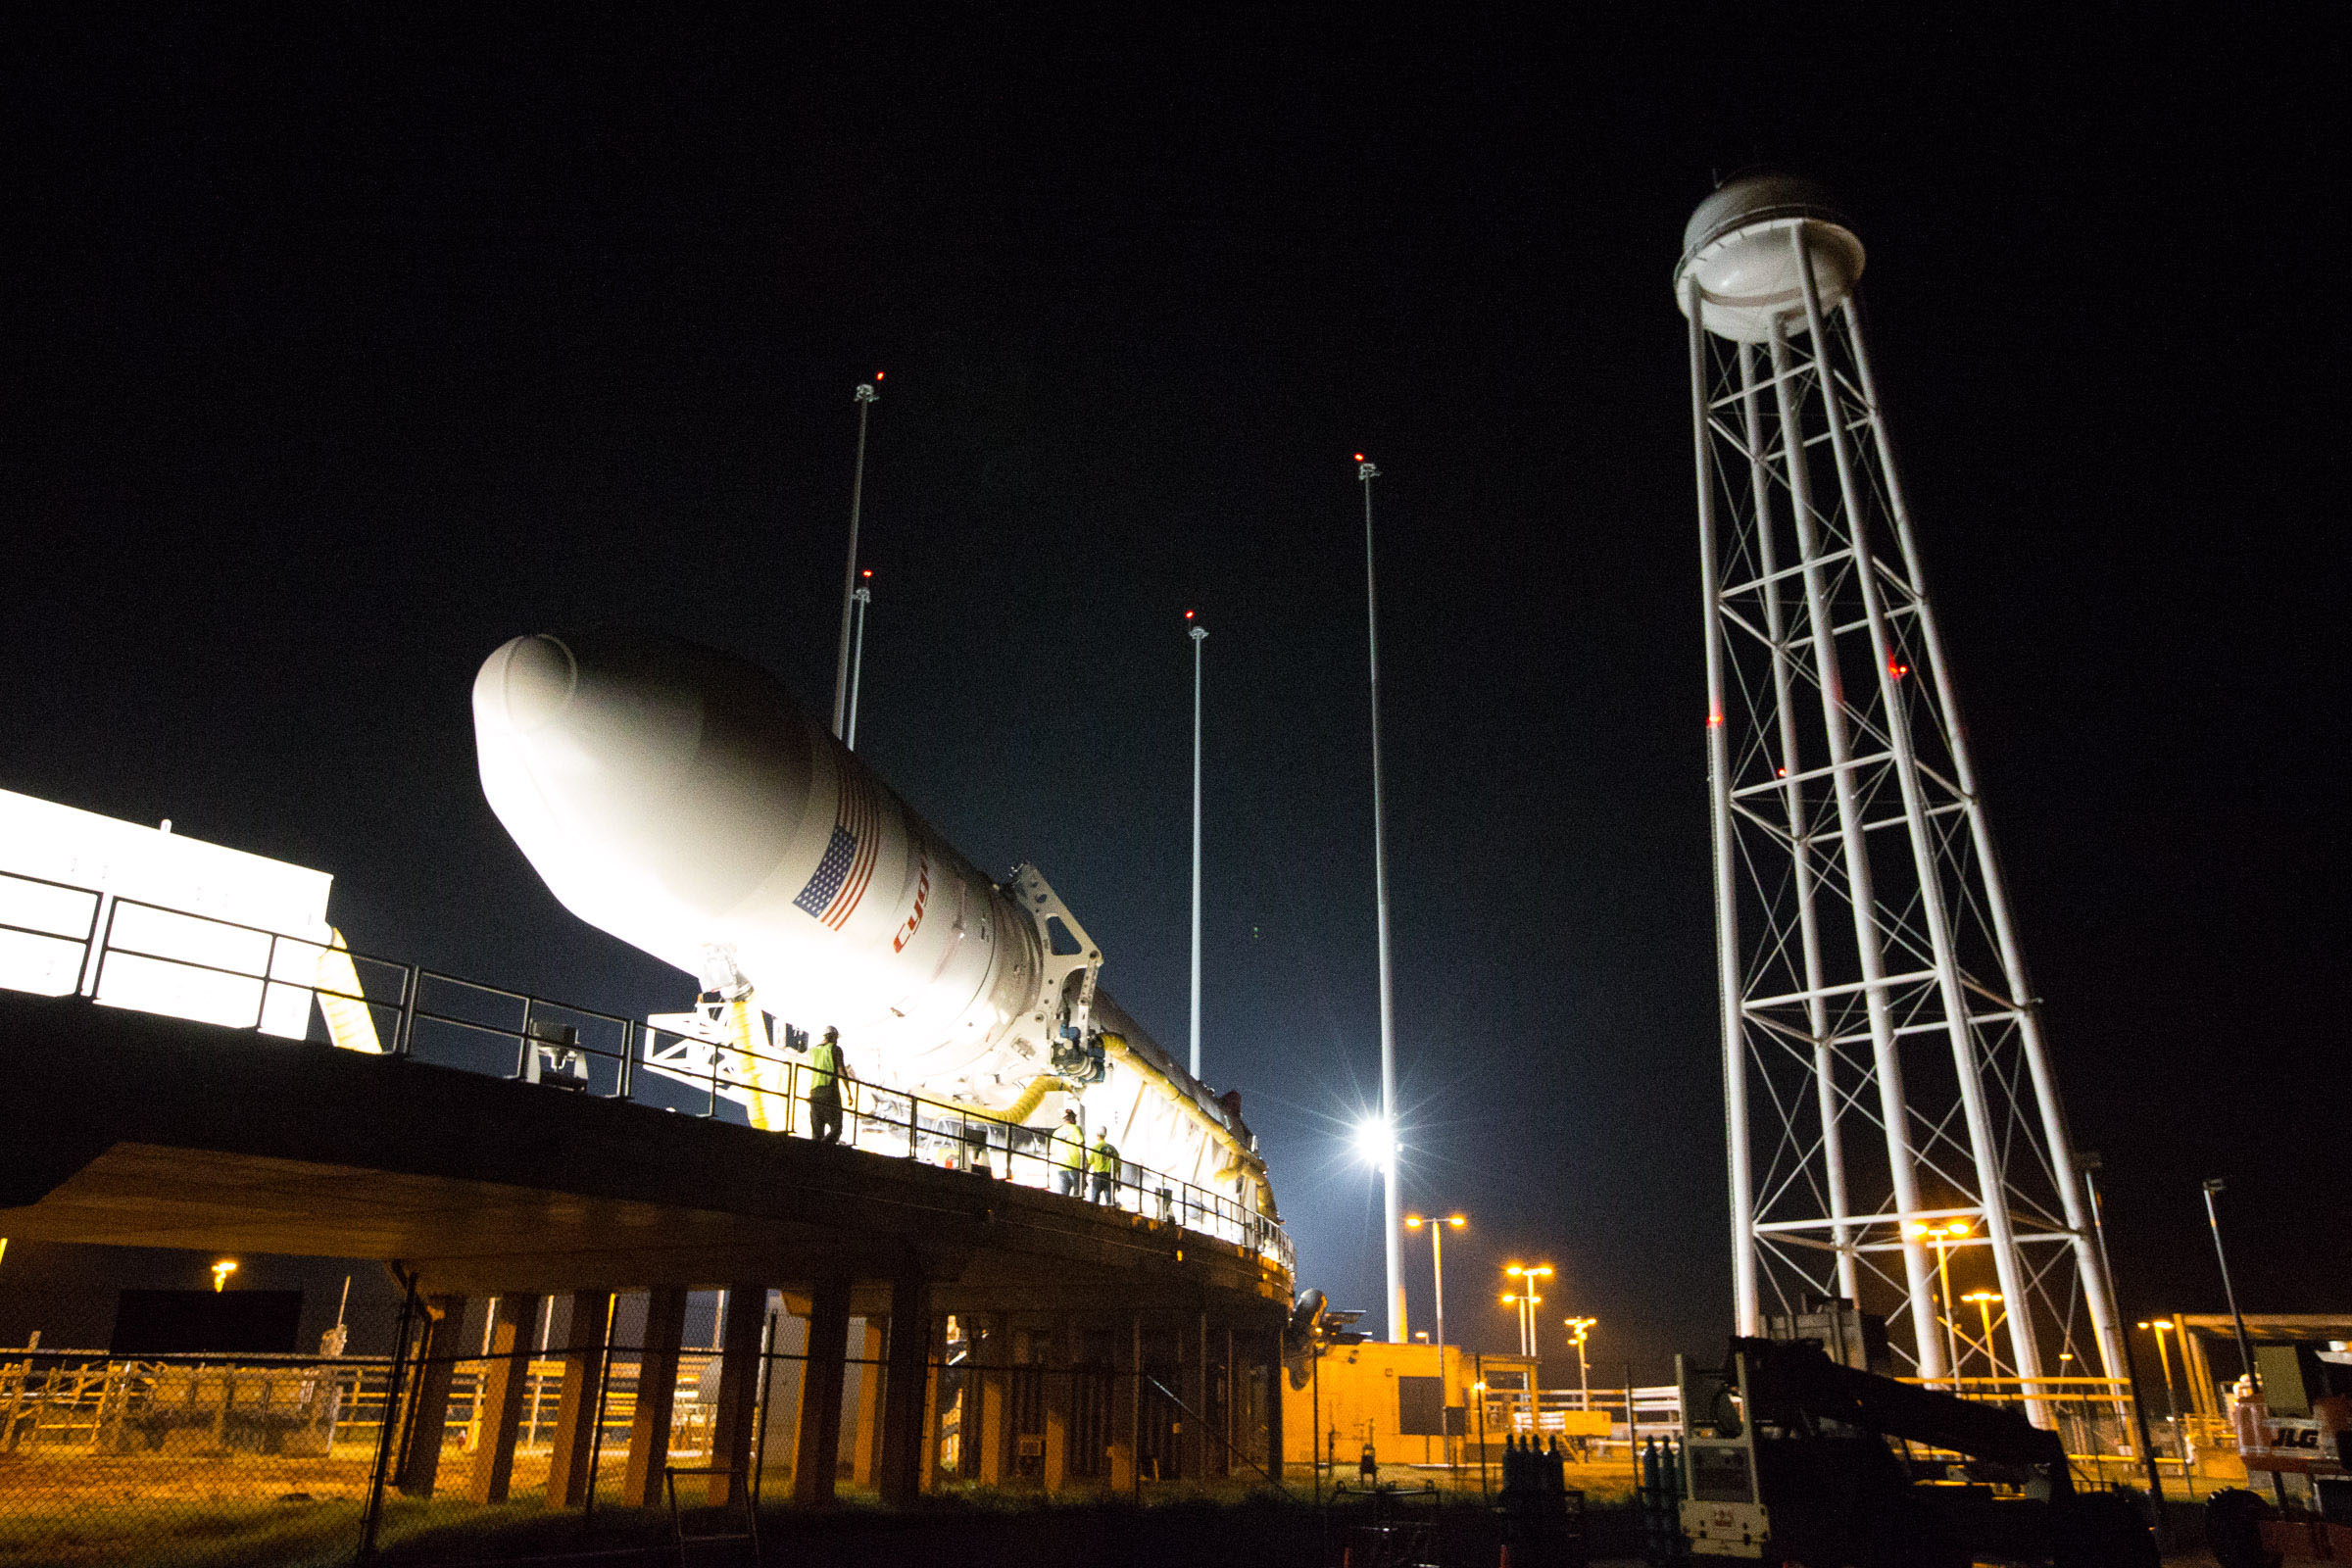 The Antares rocket is rolled out to the launch pad in this NASA image. Rollout occurred yesterday, Sept. 13 at NASA's Wallops Flight Facility in Virginia. Photo Credit: NASA / Orbital